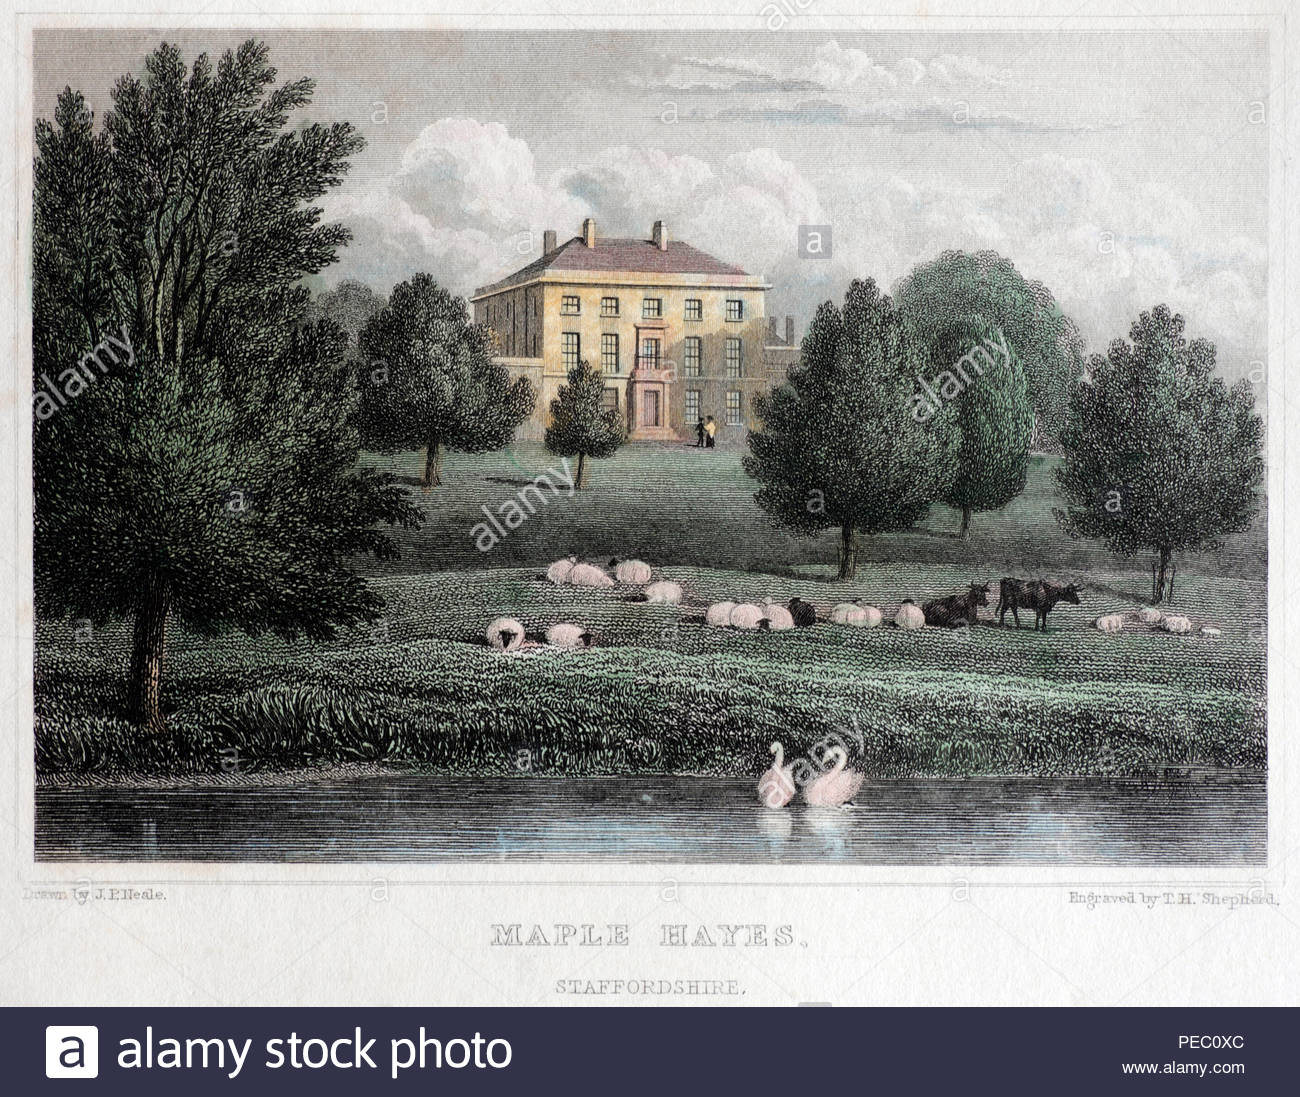 Country School Painting Stock Photos & Country School Painting Stock Images - Alamy1300 x 1097